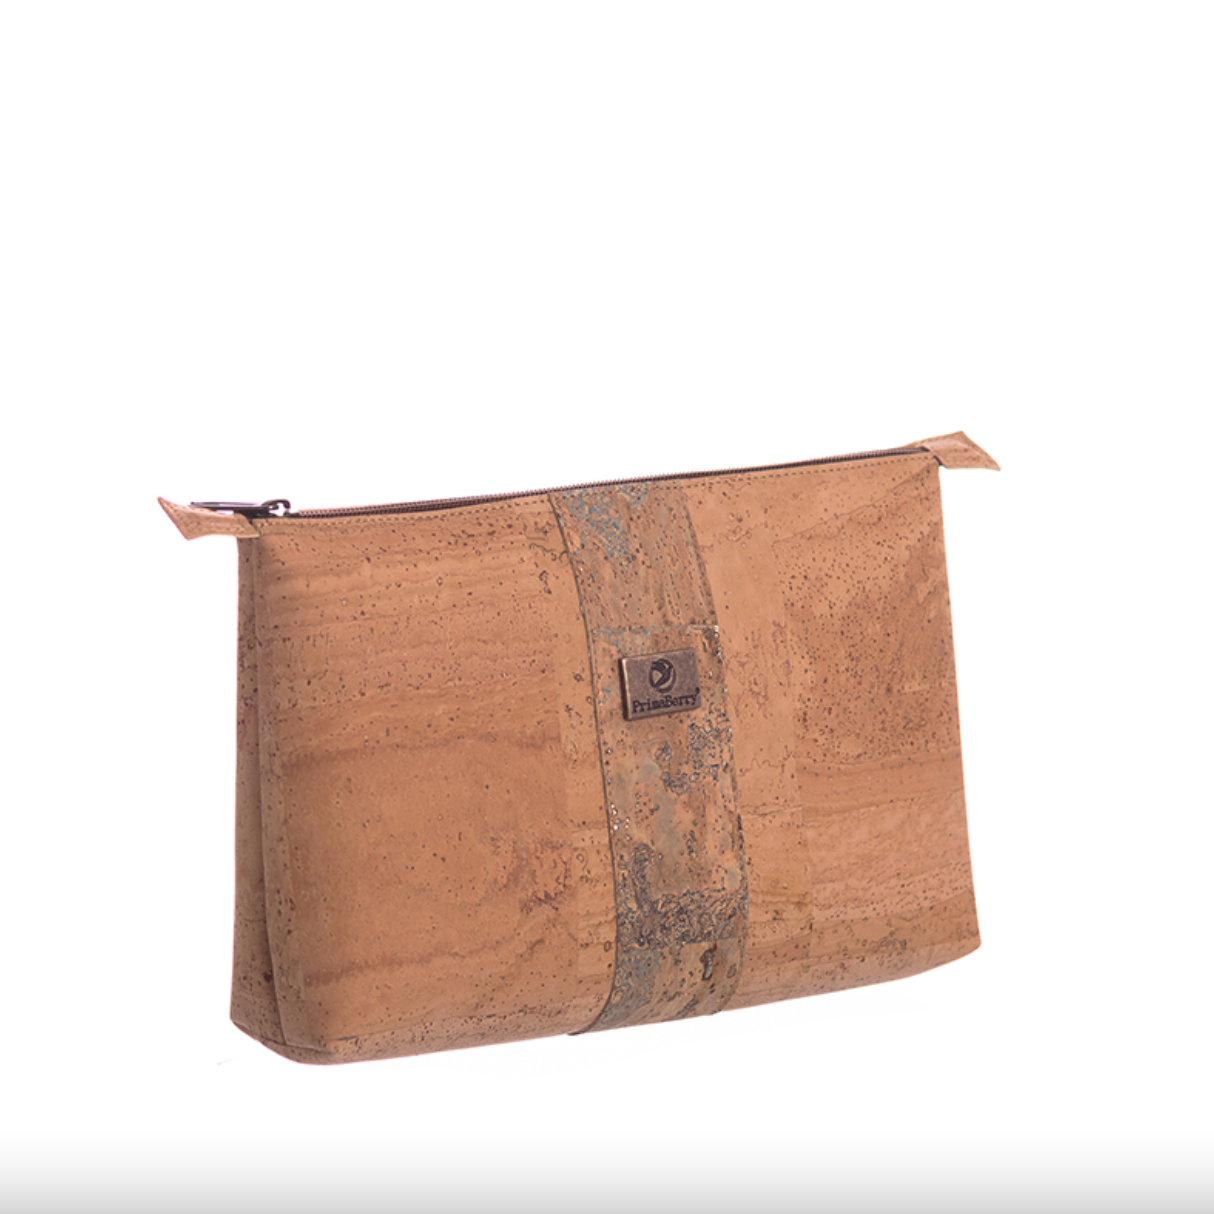 Large Map Cosmetic Bag: Stylish and Functional Travel Bag with a Vintage Map Design, Made from Sustainable Cork